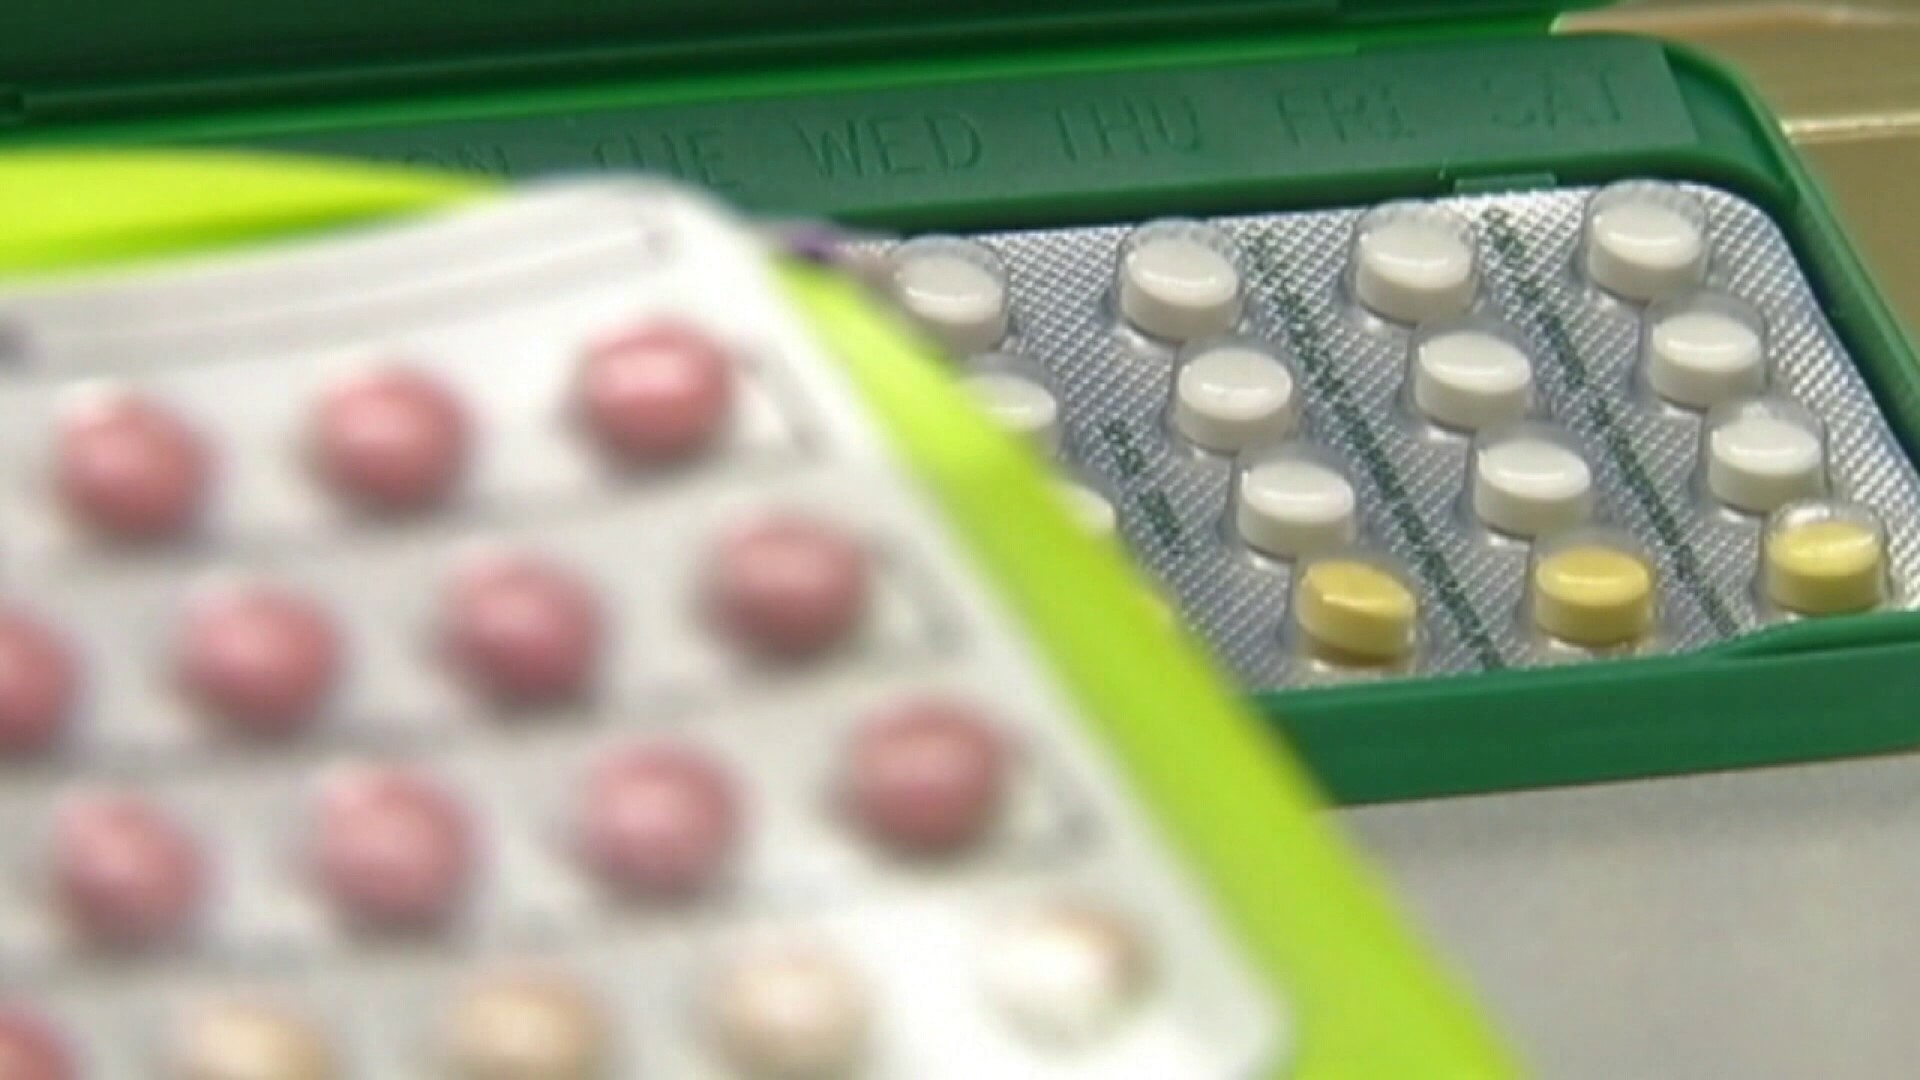 The Polk County Board of Supervisors voted unanimously Tuesday to continue funding emergency contraception for victims of sexual assault.